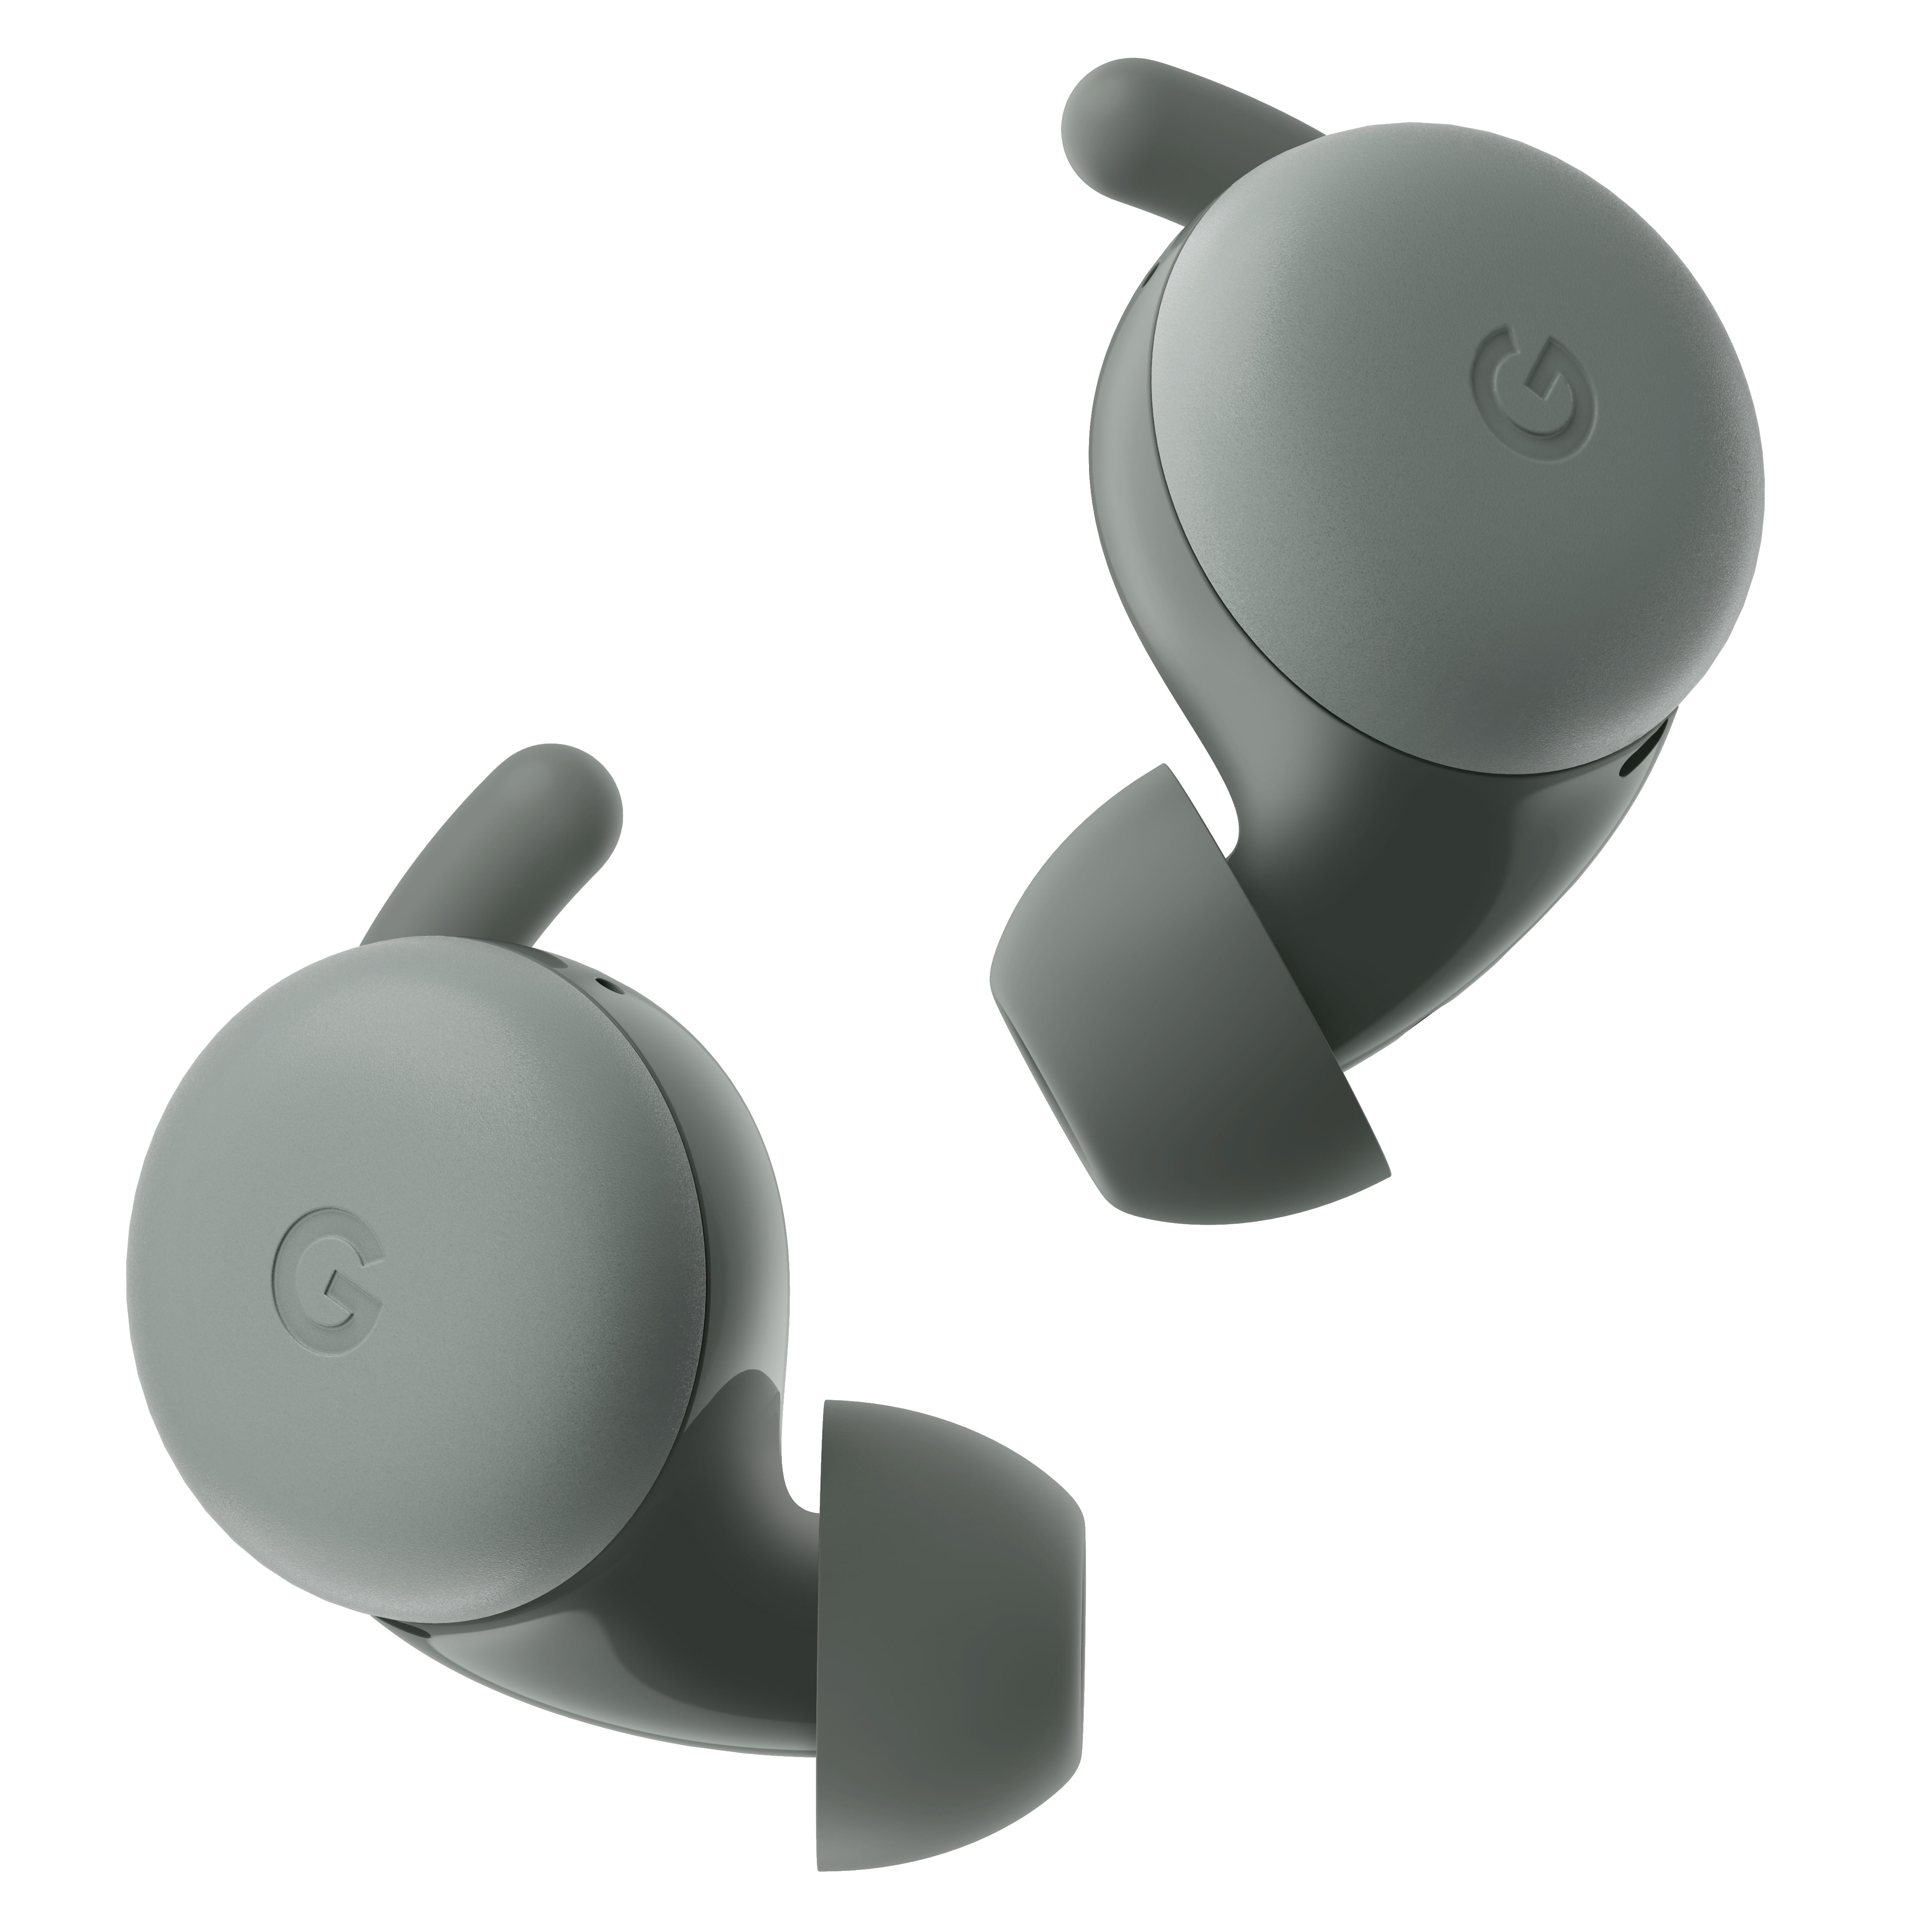 OK, Google: Pixel Buds 2 are the real deal - CNET